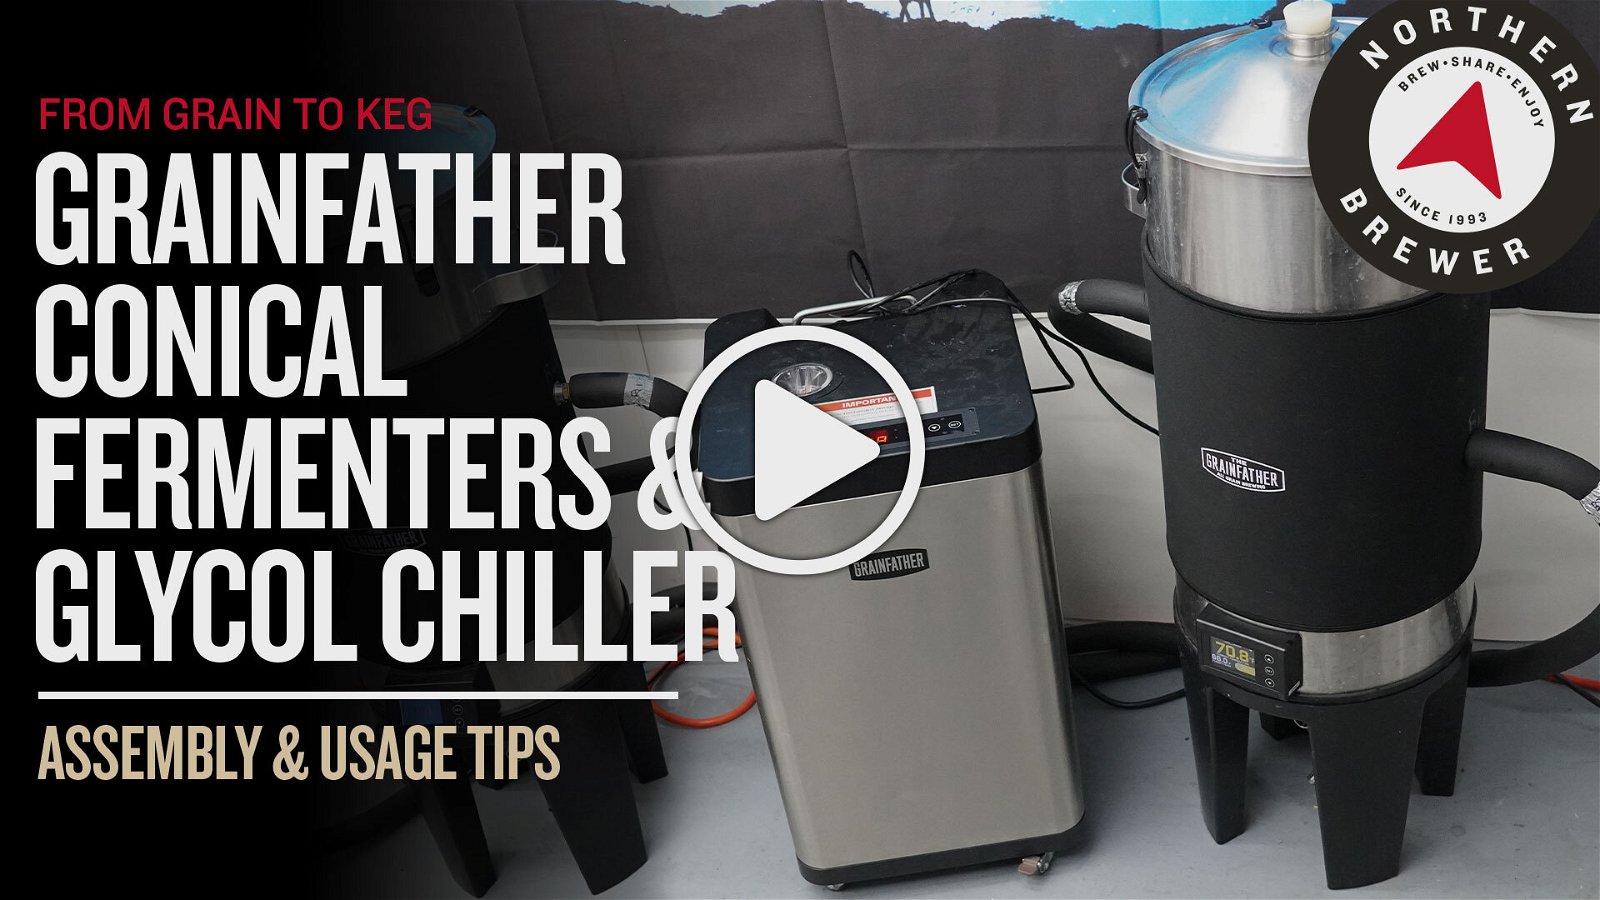 Ultimate Grainfather Setup! Conical Fermenters & Glycol Chiller